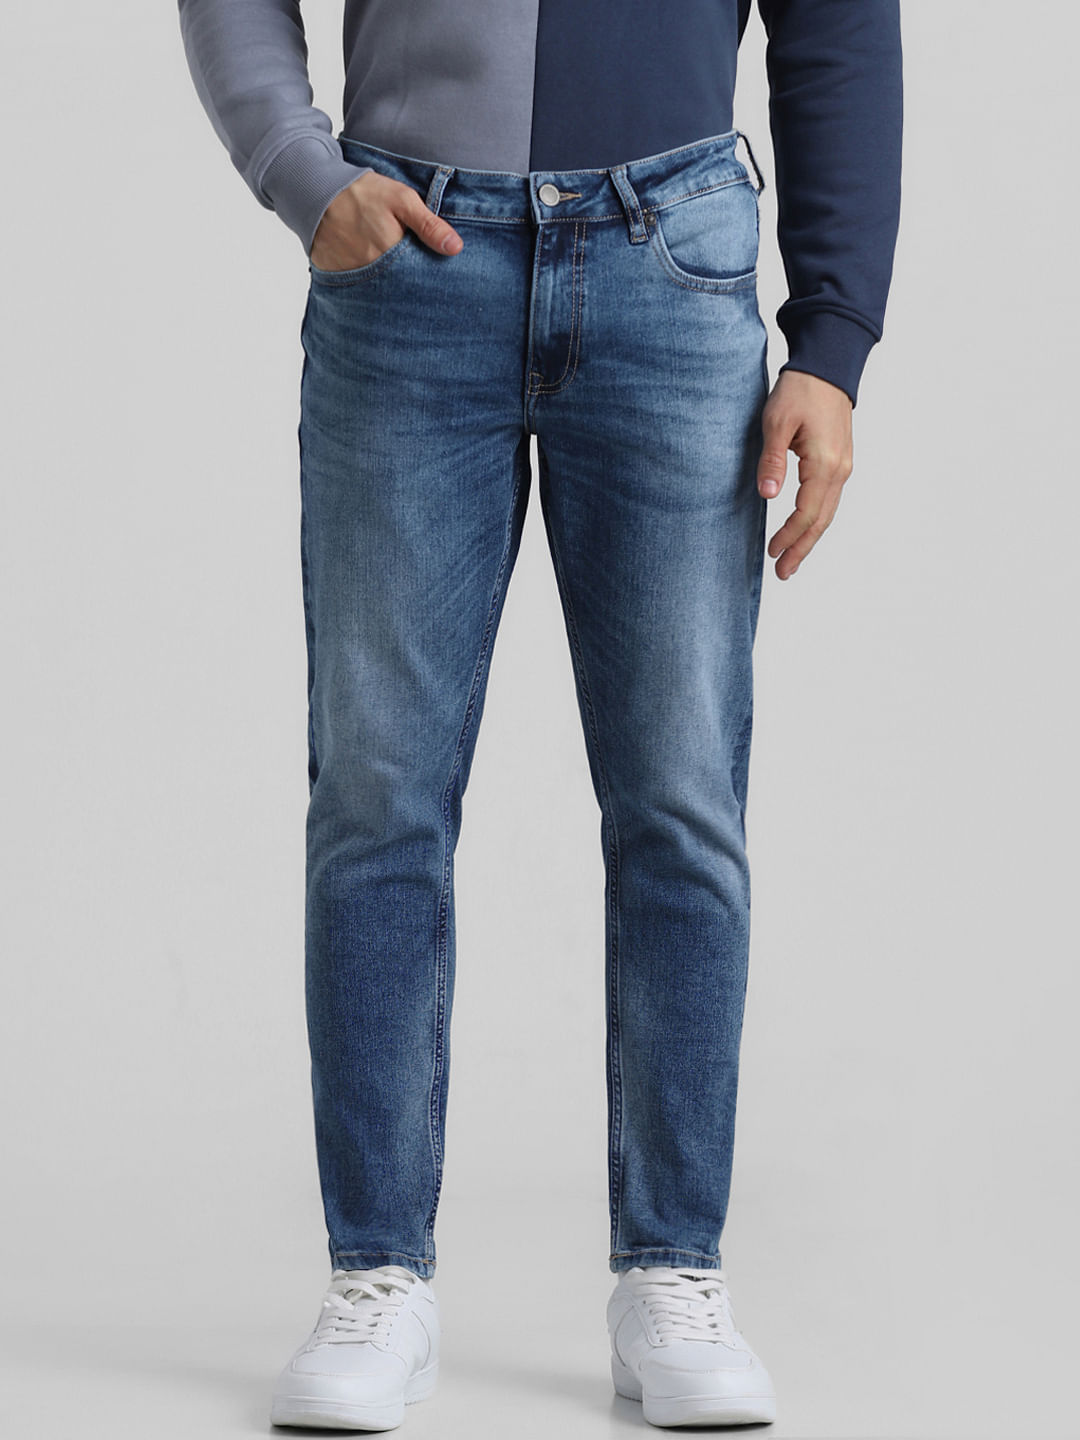 Sinners Attire Jeans | Men's Ripped & Repaired Jeans | Skinny Jeans for Men  - SINNERS ATTIRE